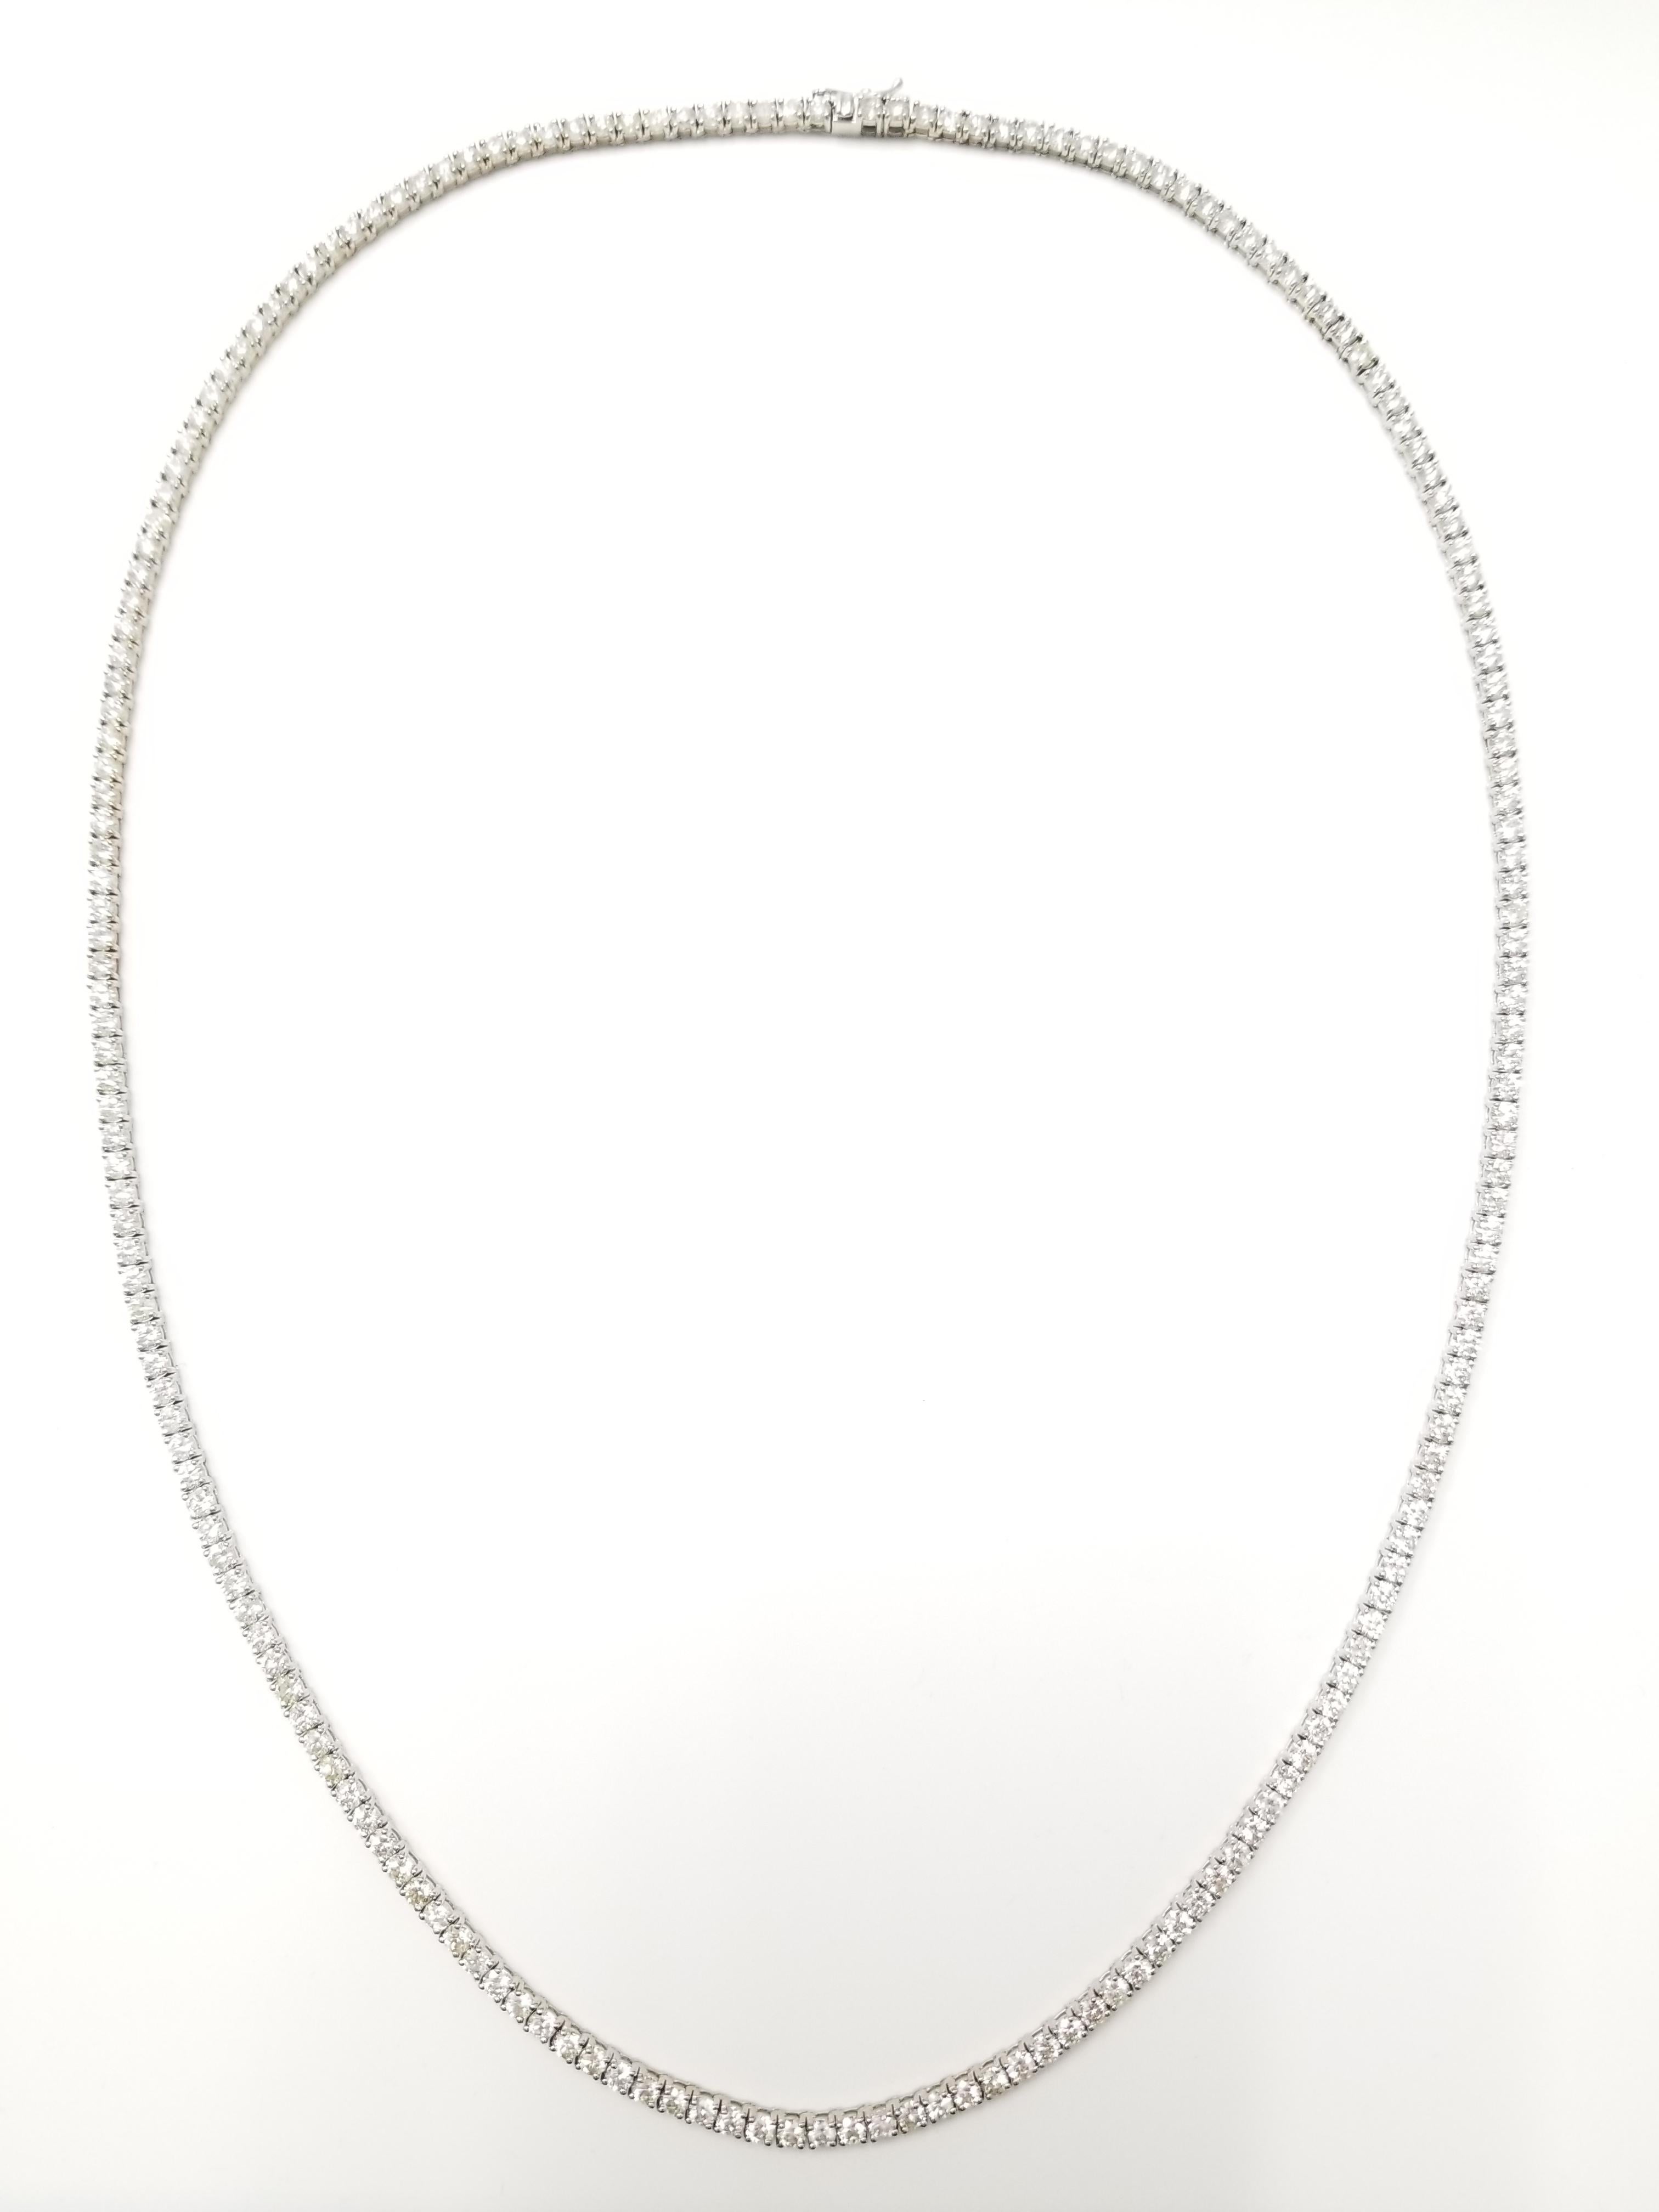 Stunning looking 14 Karat White Gold Round Brilliant Cut Diamond Tennis Necklace set on 4 prong setting. The total diamond weight is 19 carats. The closure is an insert clasp with safety clasp. Length is 24 inches. Amazing holiday gift or treat for